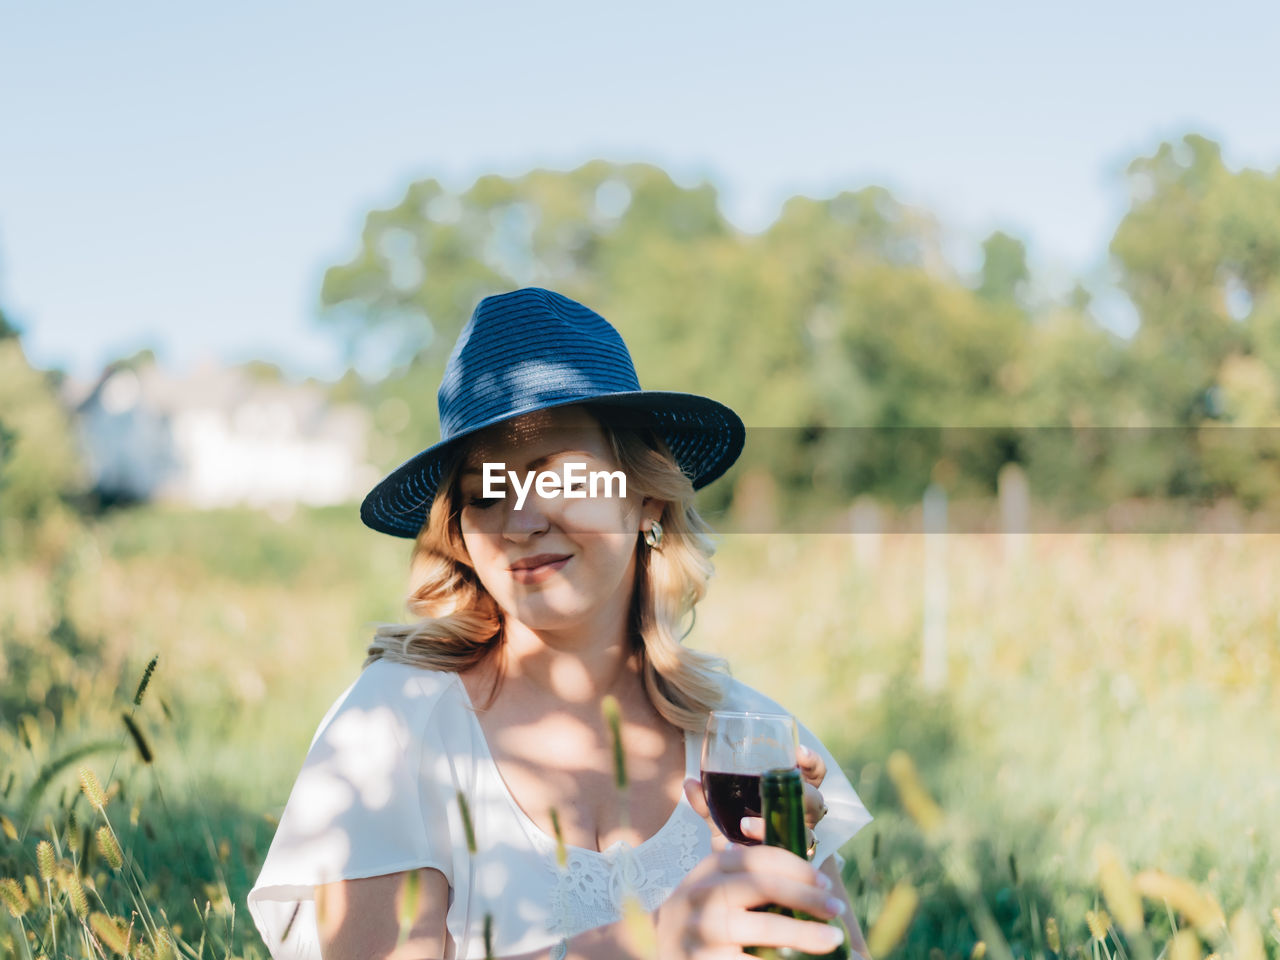 Young millennial woman outdoors in apple orchard having a glass of red wine with fedora hat on